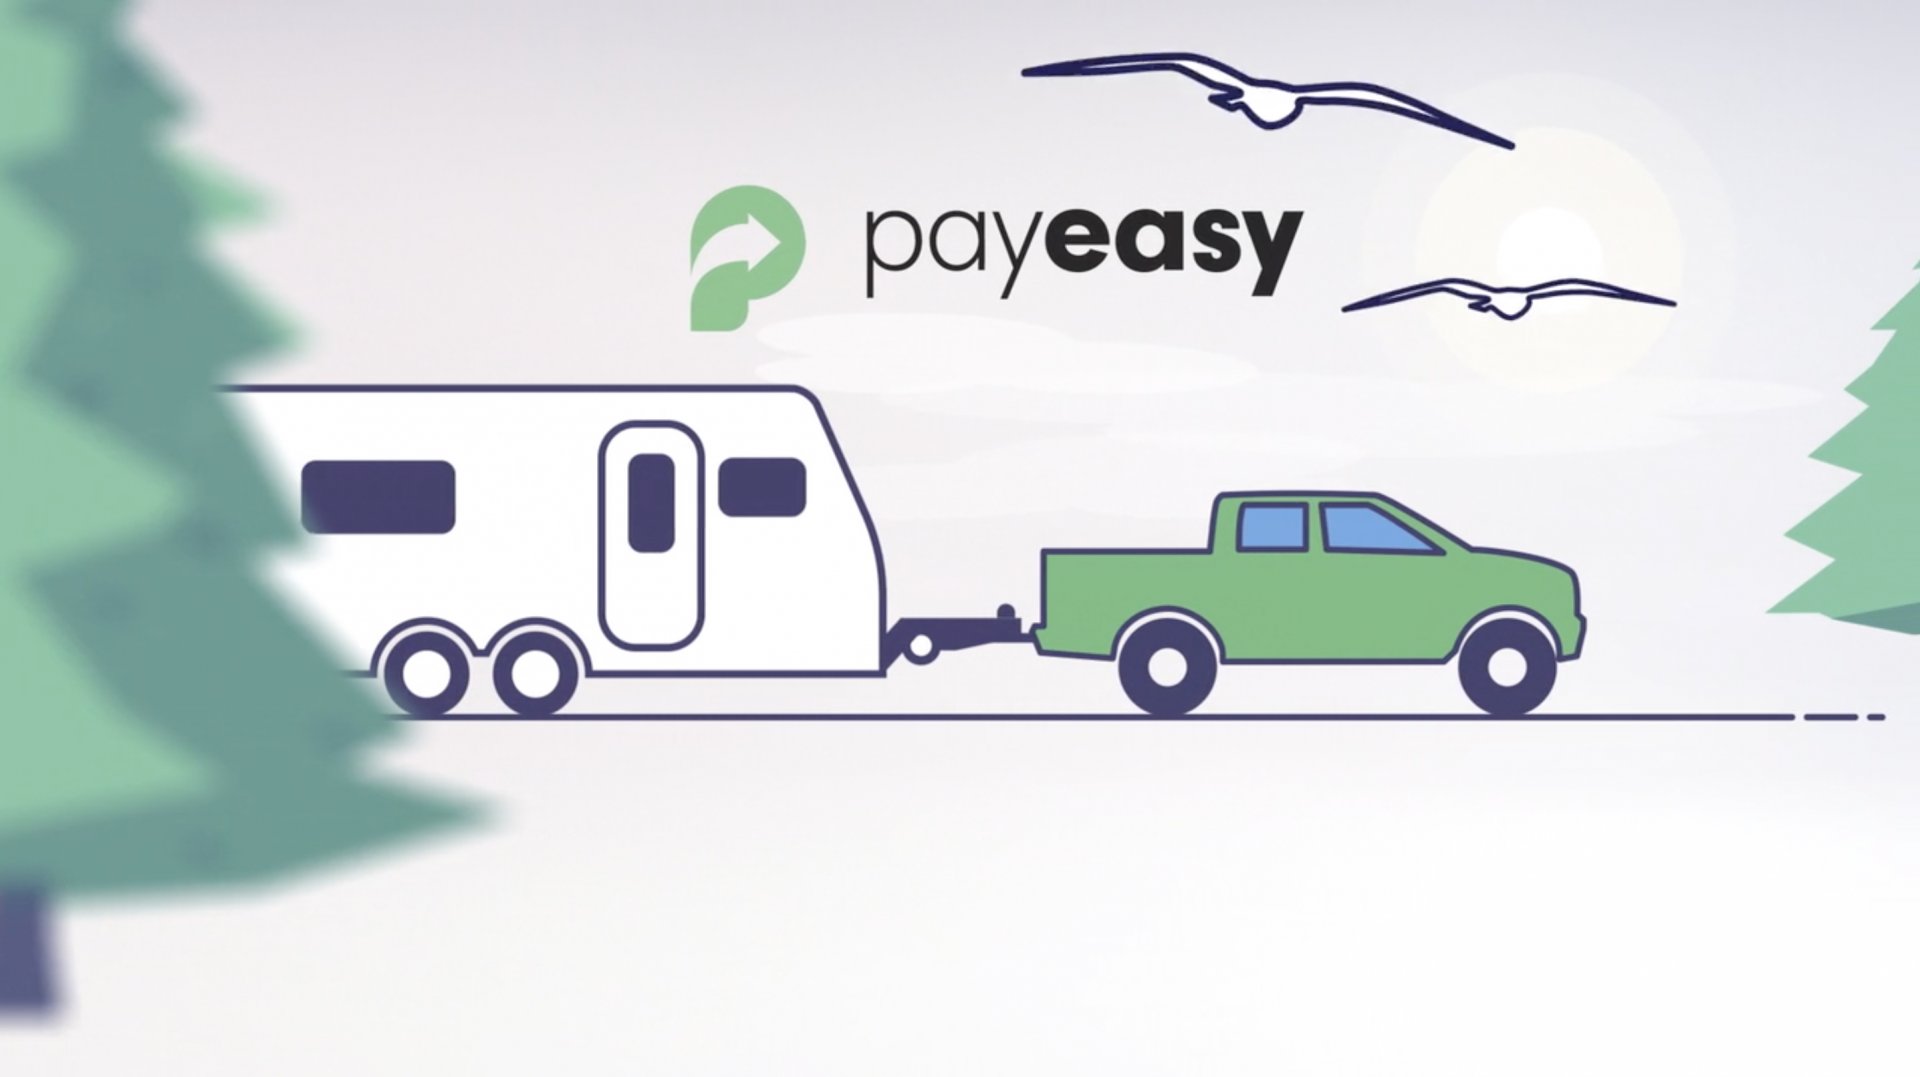 Pay Easy Video poster with car and boat image